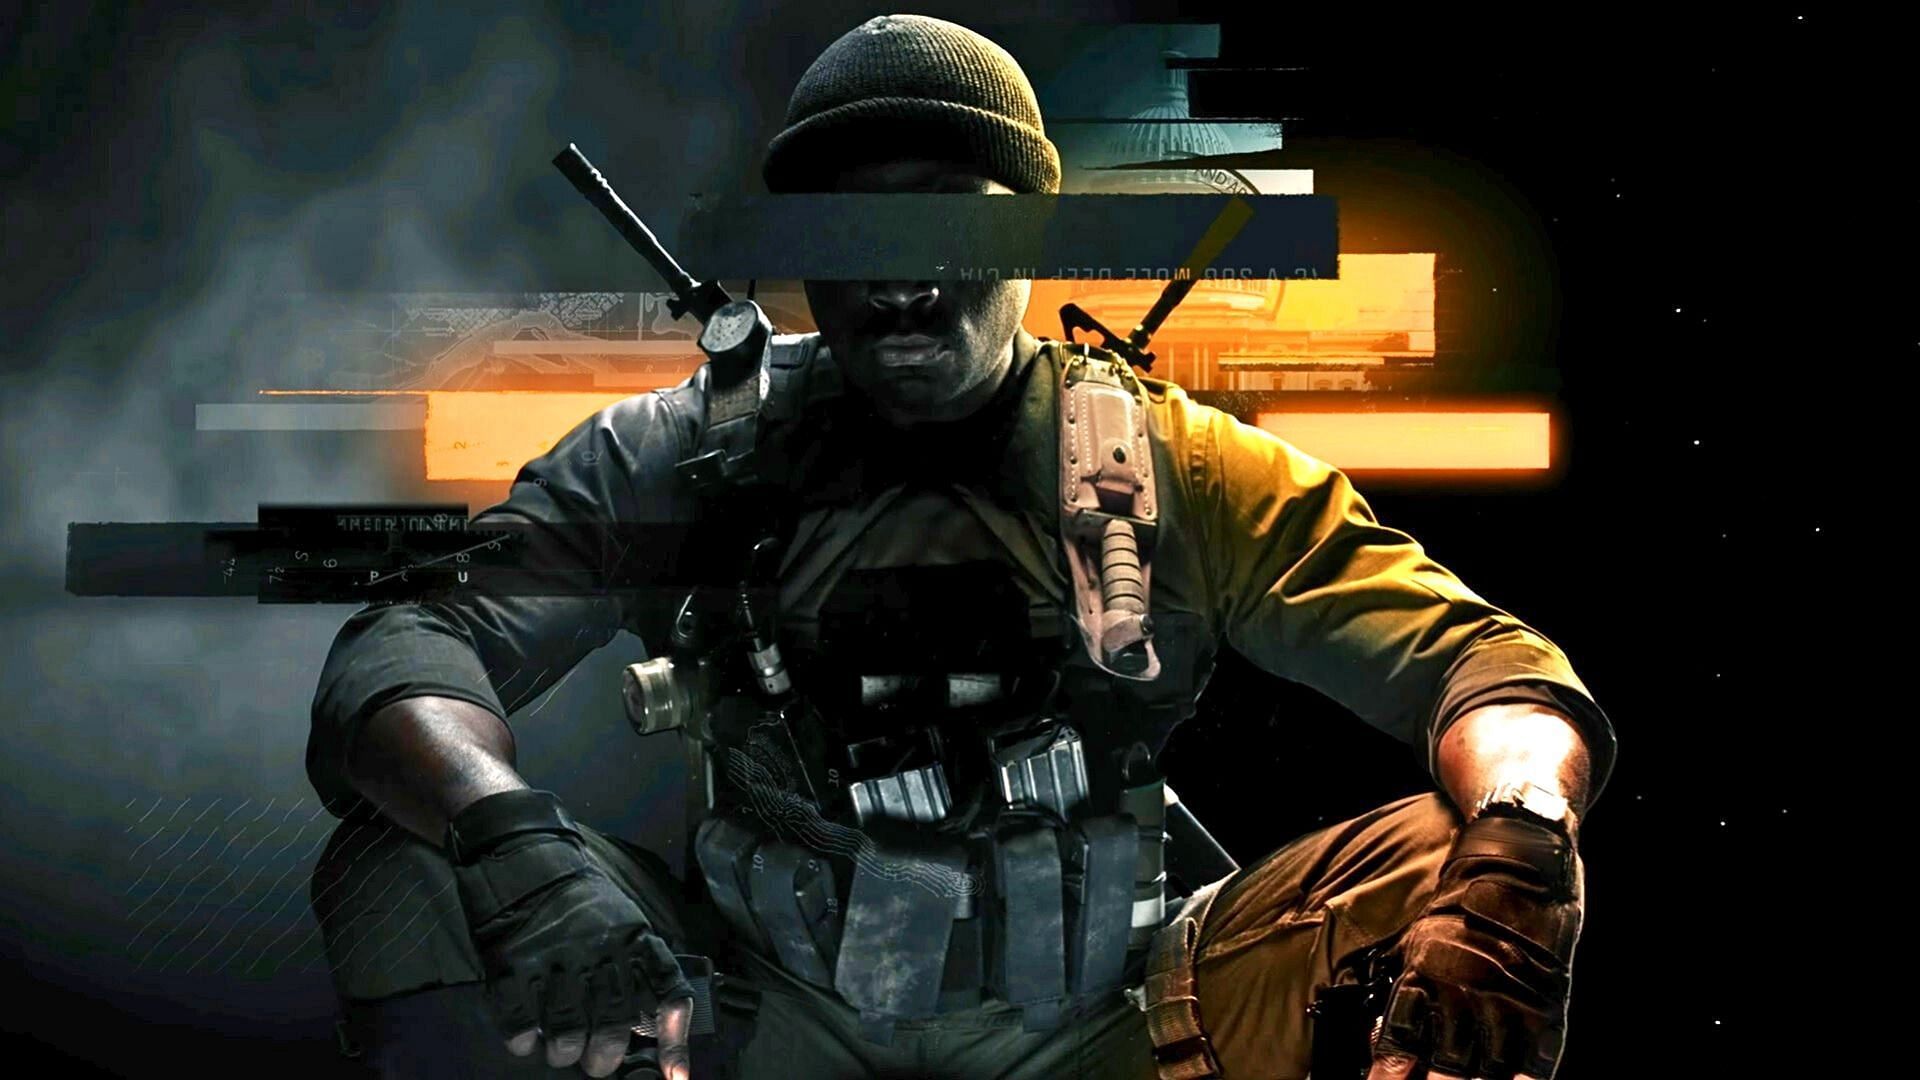 Troy Marshall as seen in the key art of Black Ops 6